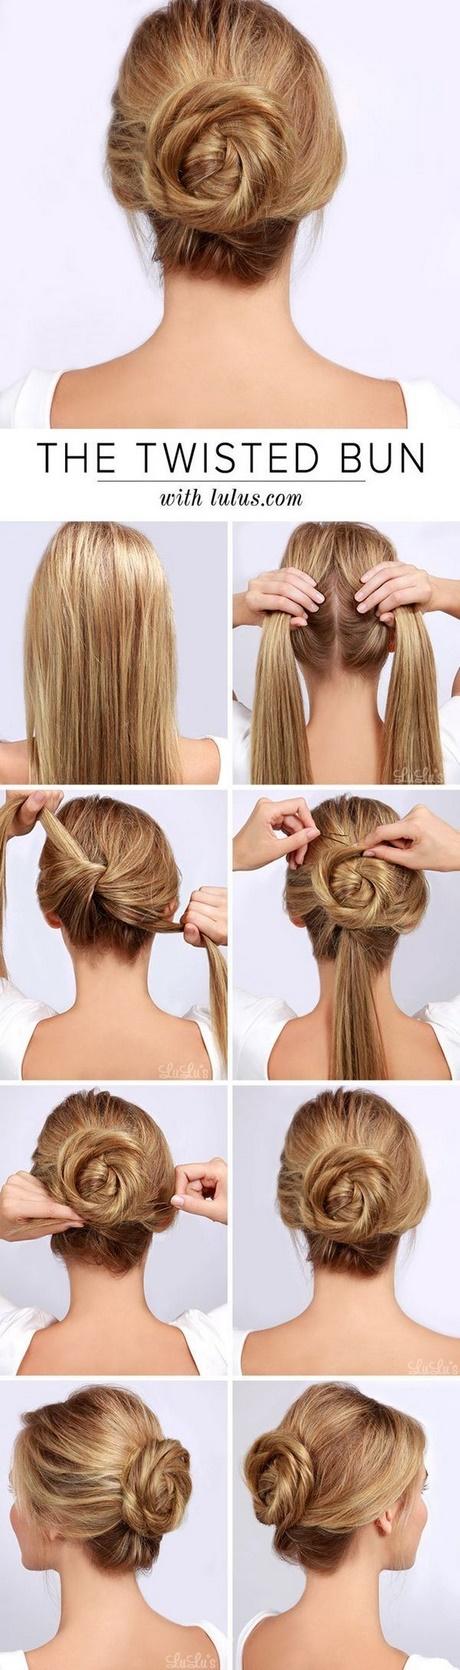 Easy hairstyles for everyday easy-hairstyles-for-everyday-88_18